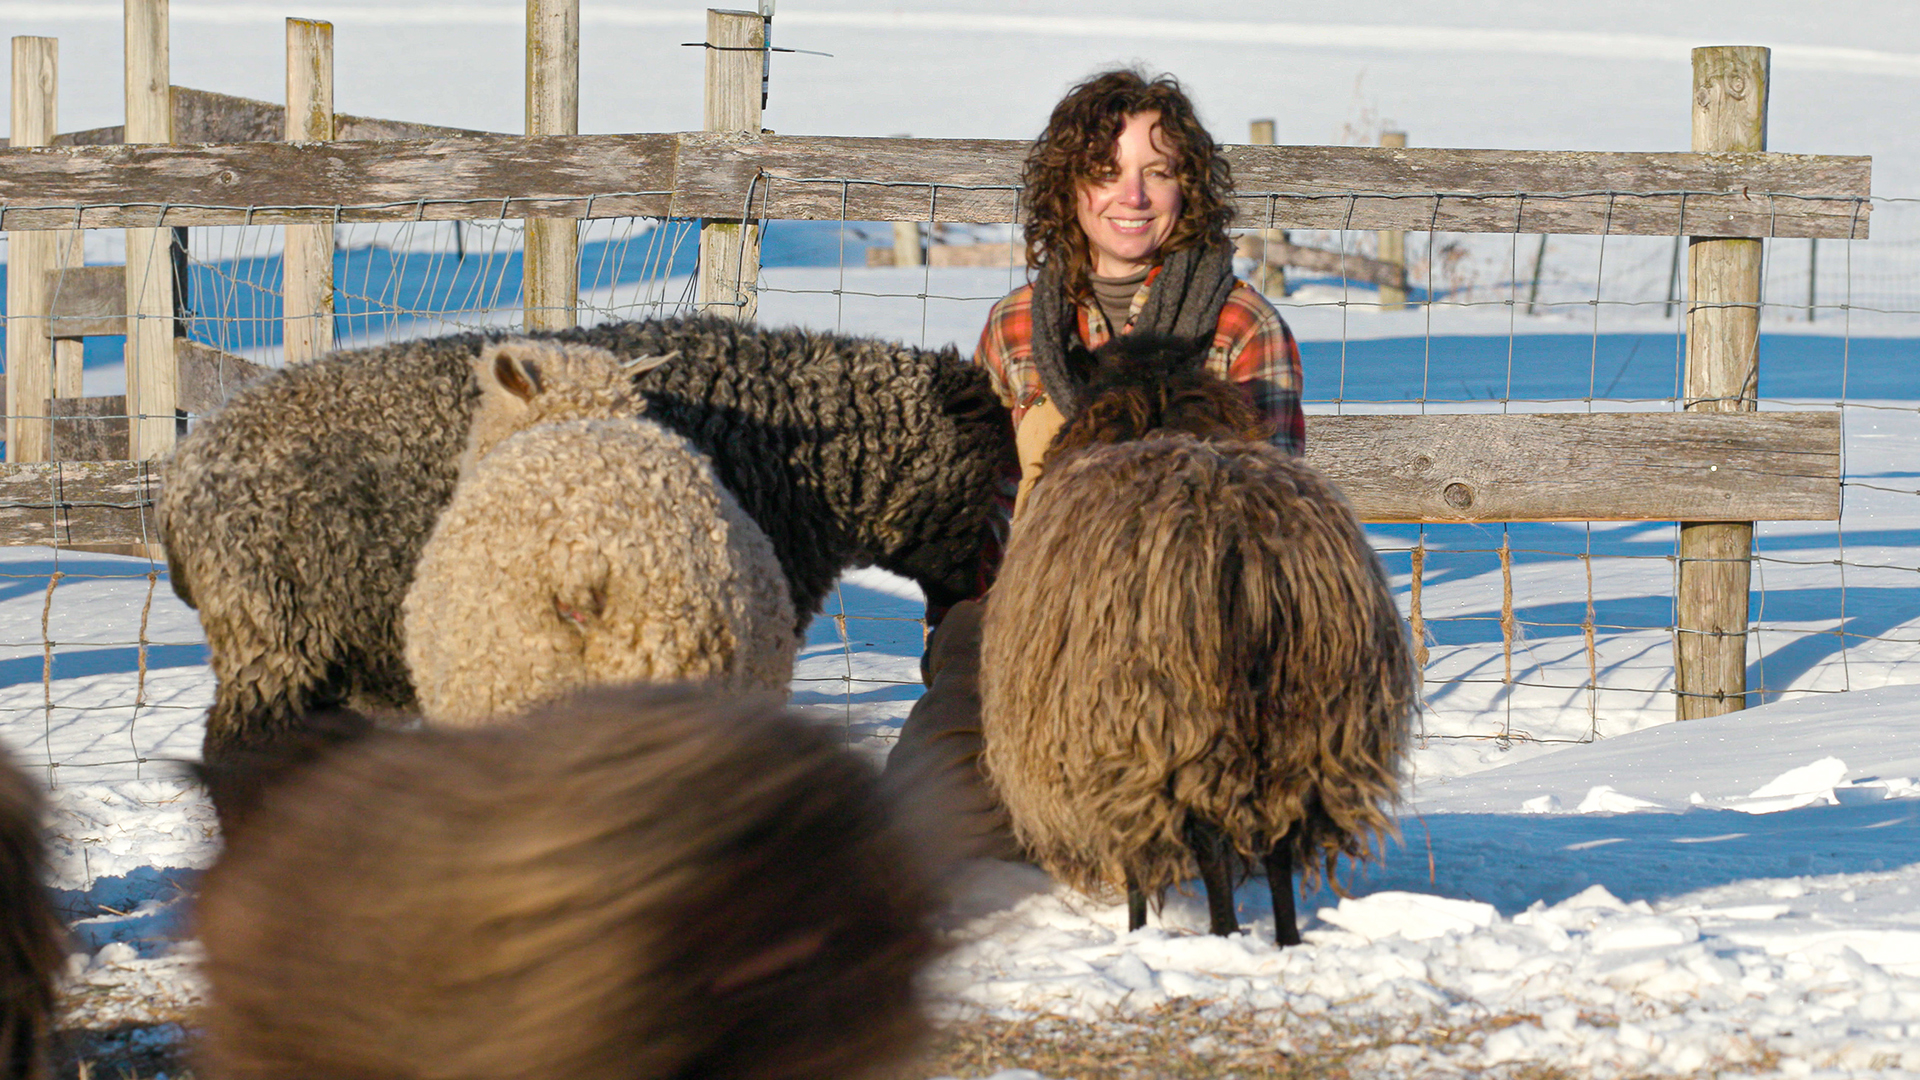 Fiber farmer Melissa Todd crouches down and tends to her sheep in a snow-covered pasture at her farm.